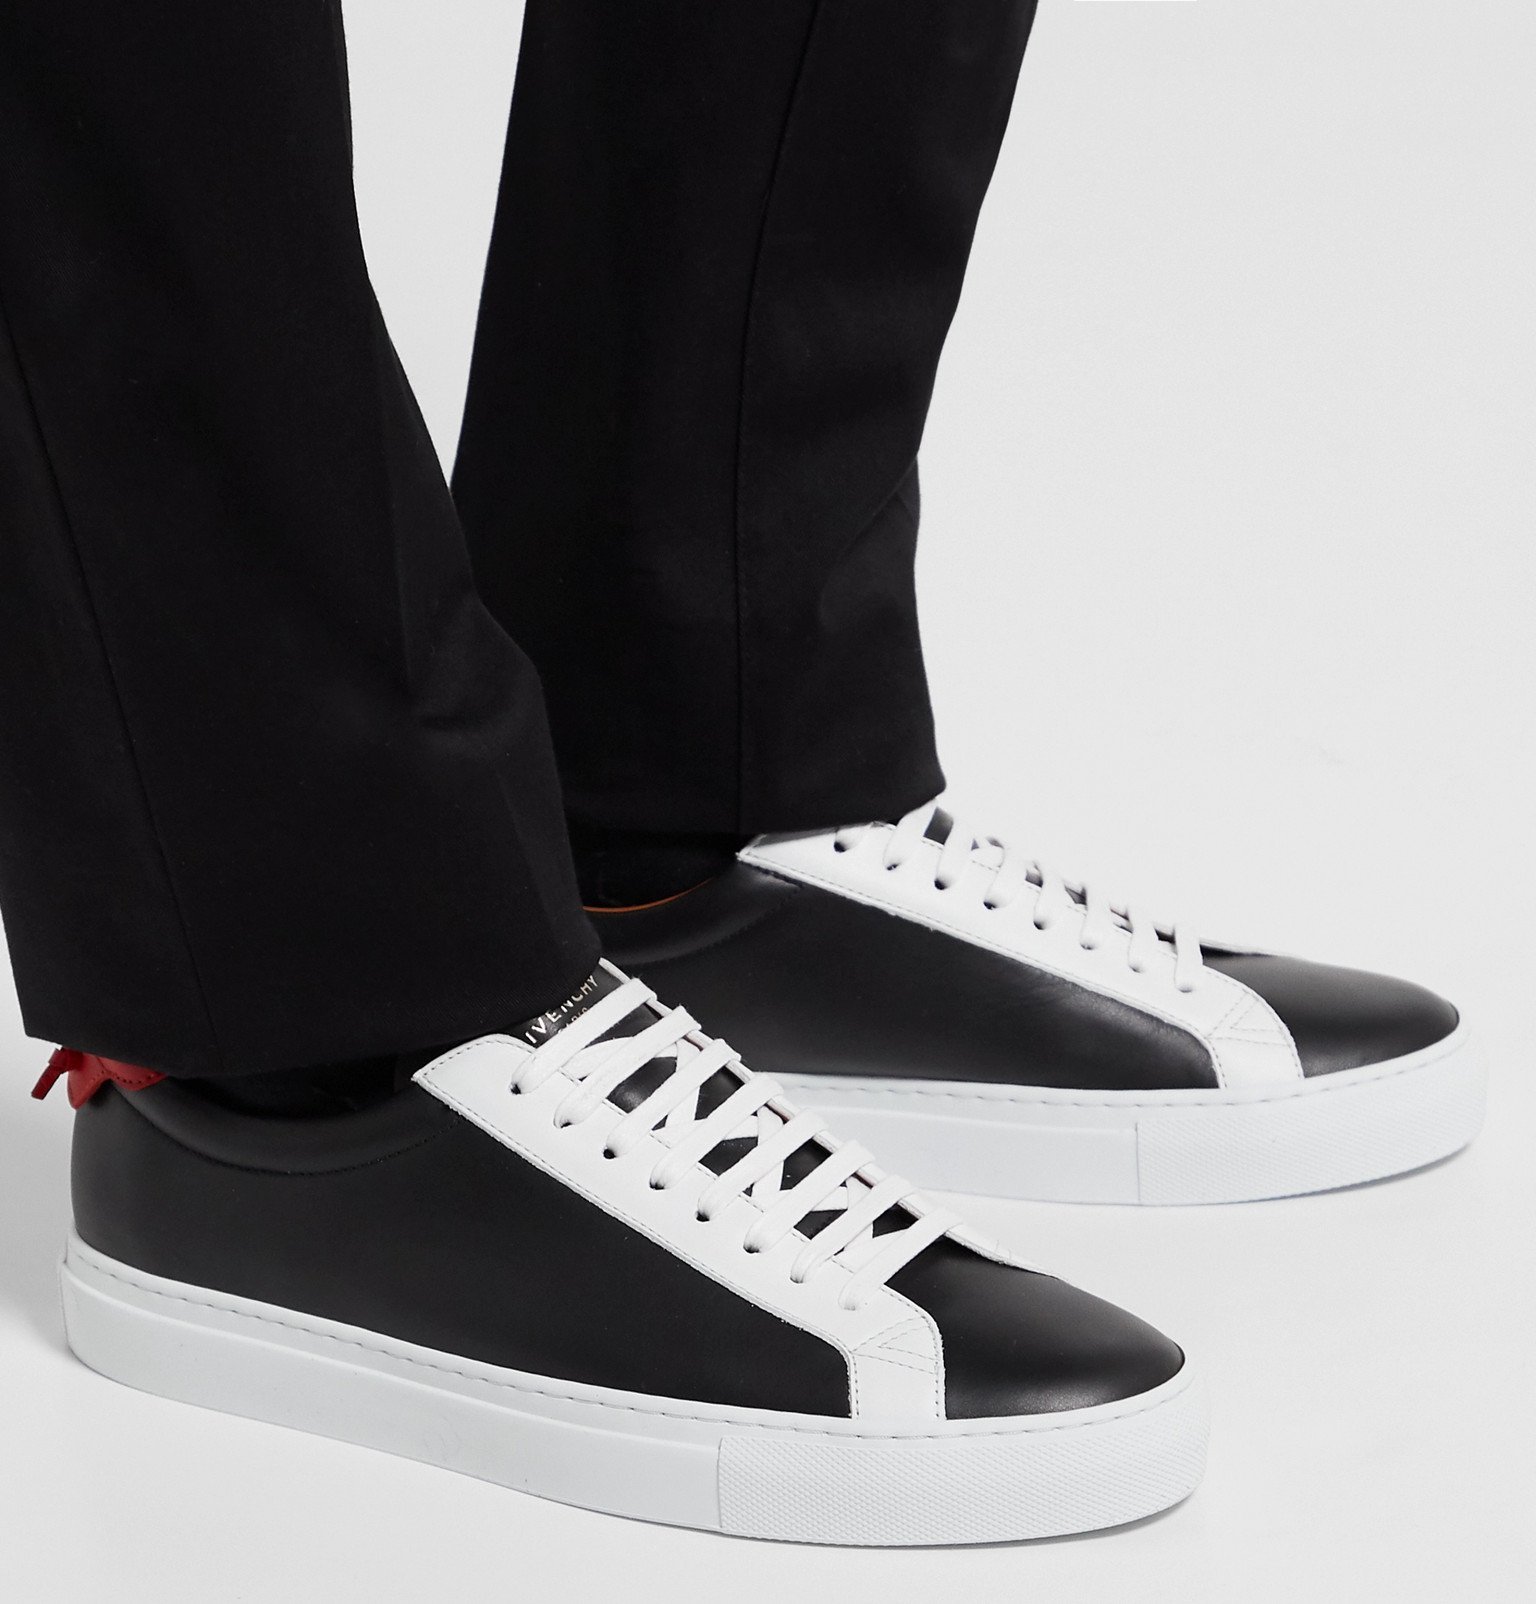 Givenchy - Urban Street Colour-Block Leather Sneakers - Black Givenchy